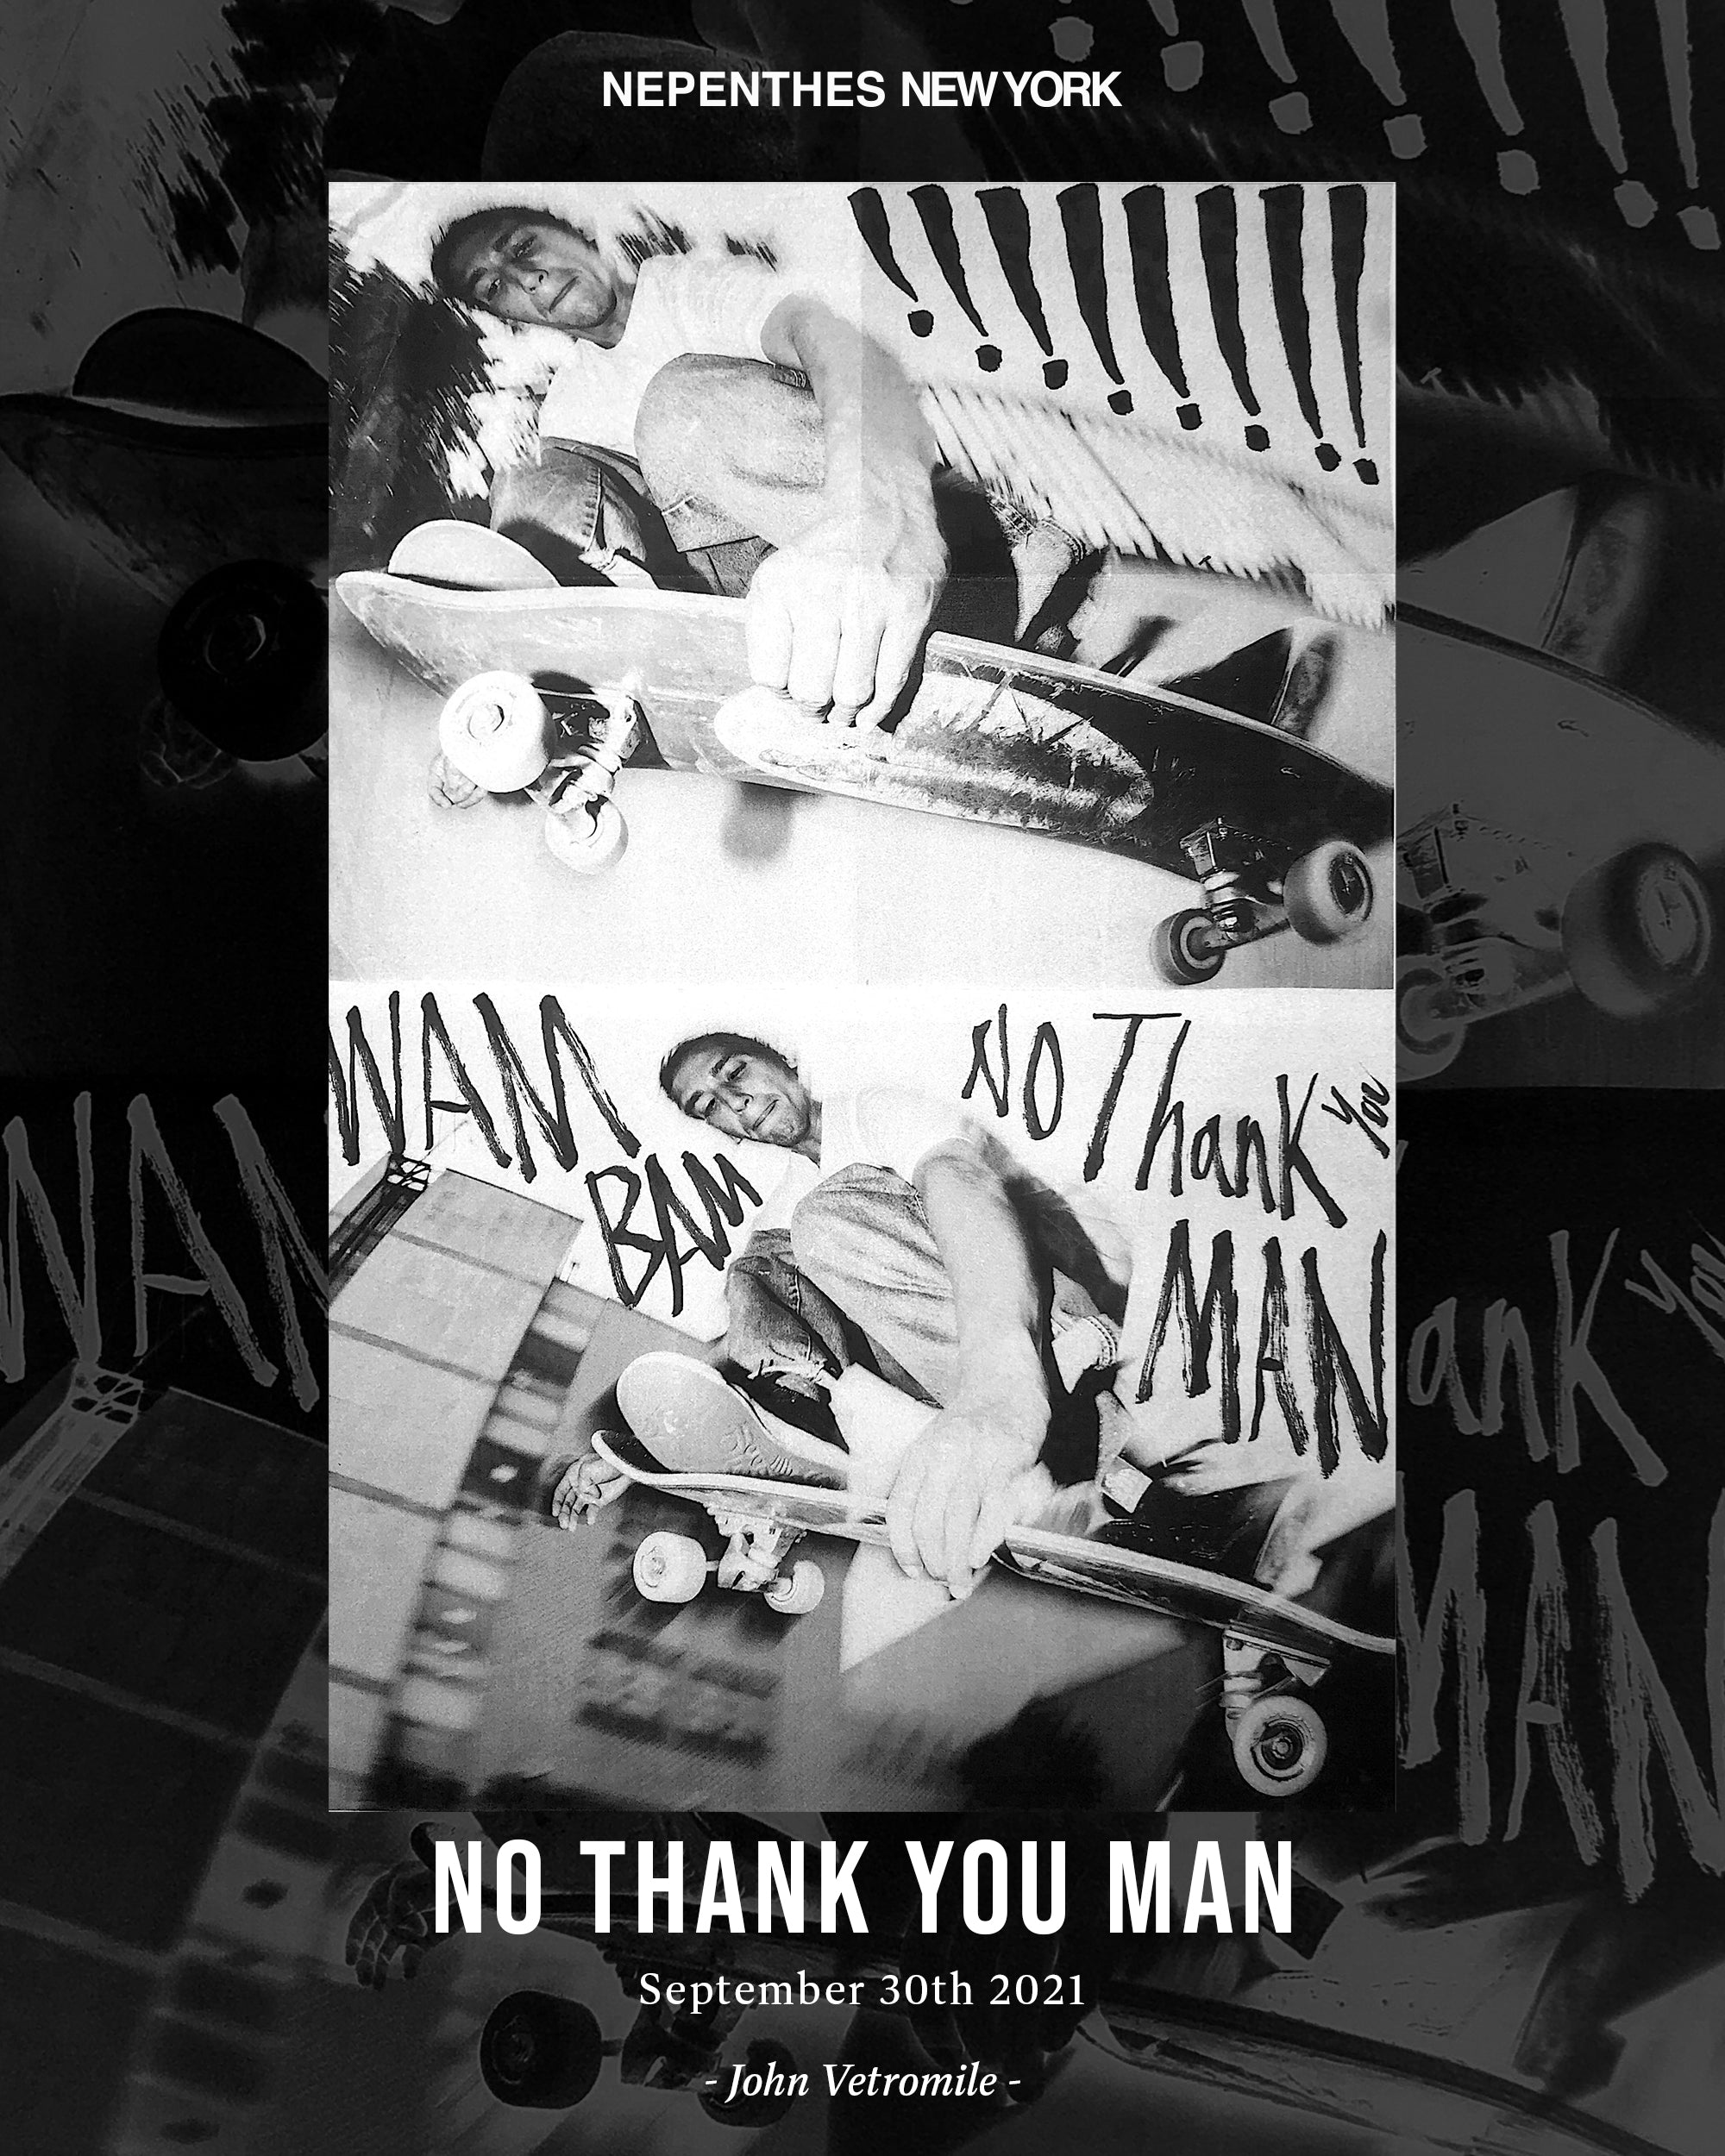 NEPENTHES NEW YORK PRESENTS : "NO THANK YOU MAN" BY JOHN VETROMILE